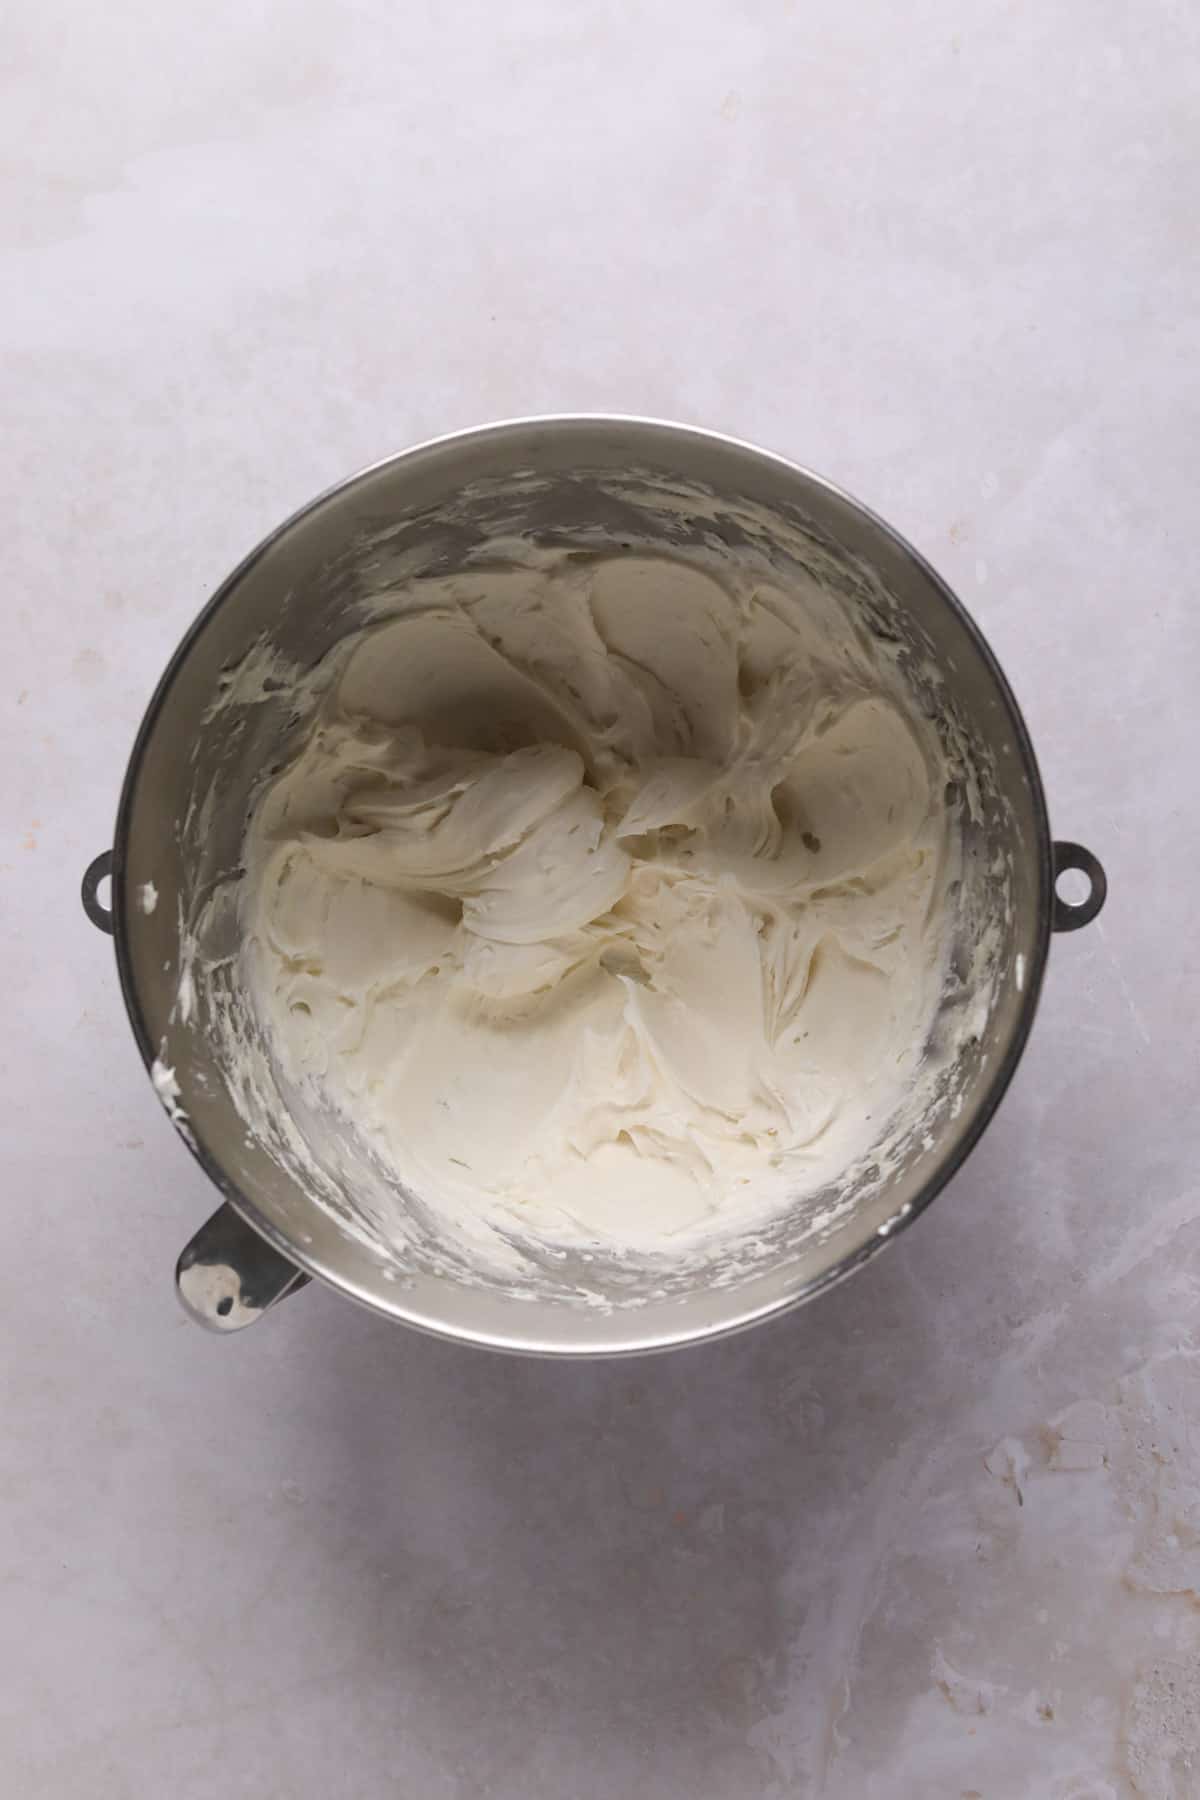 Cream cheese frosting mixed in a stand mixer bowl.